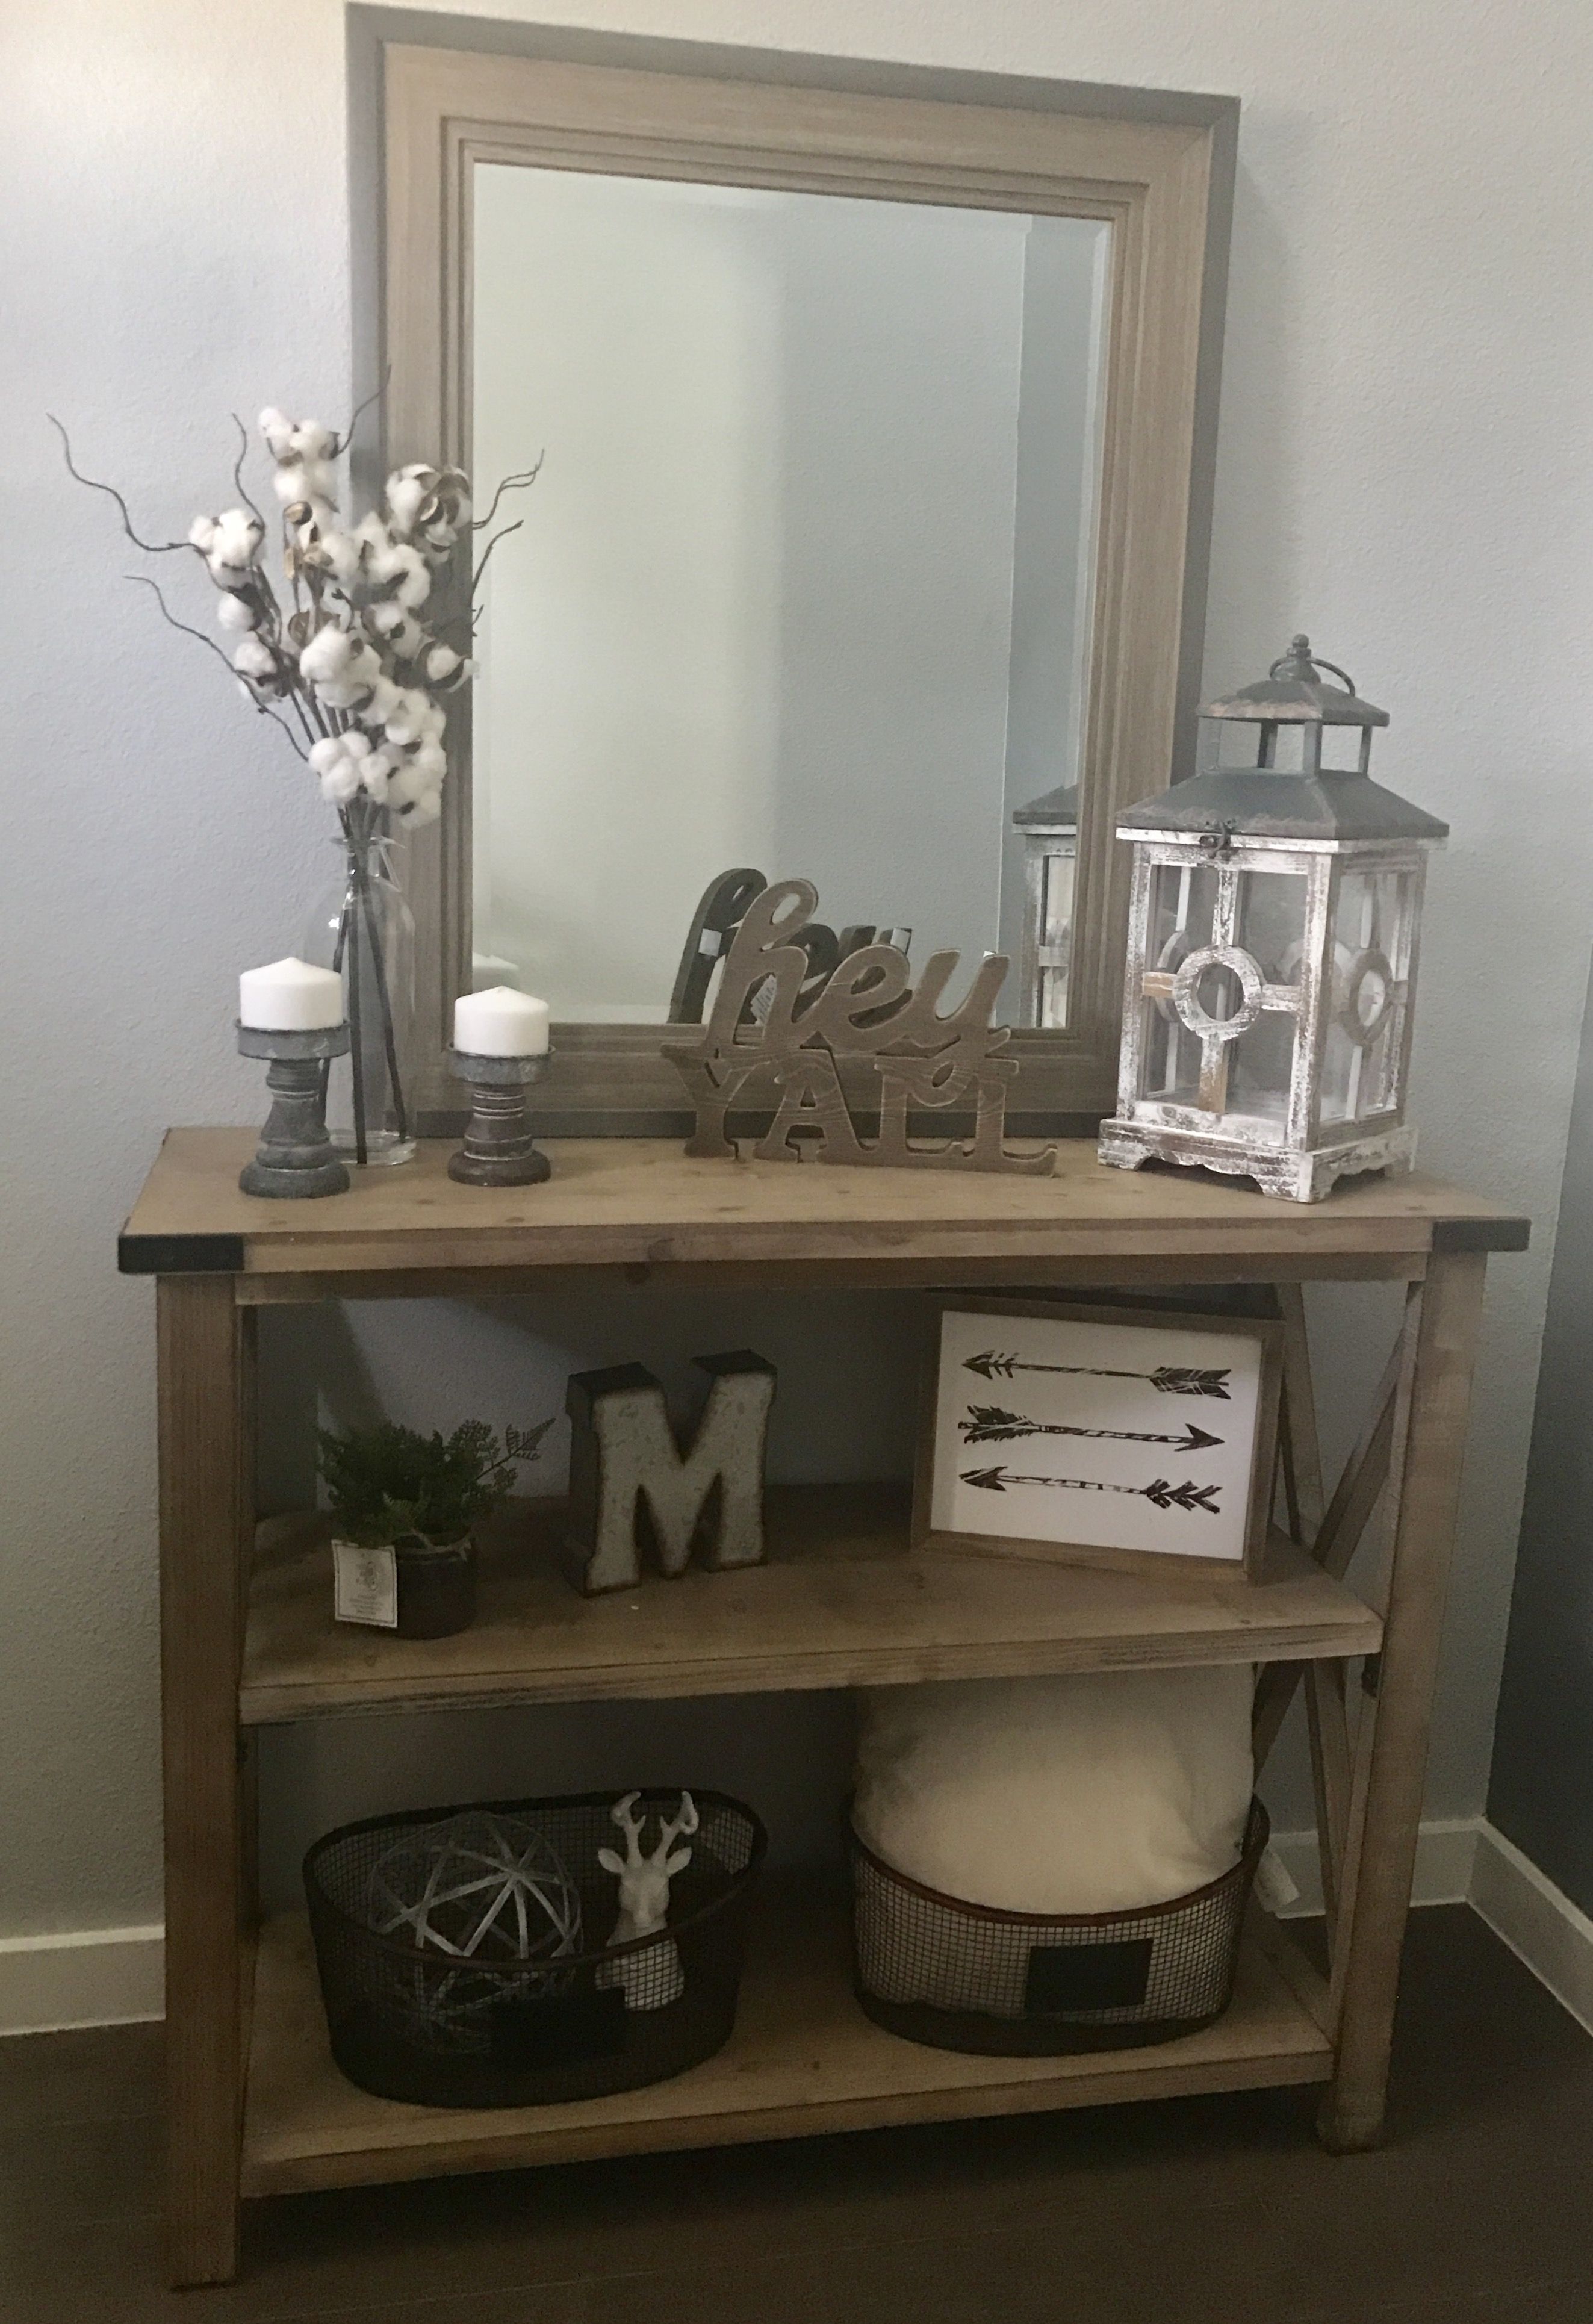 new modern farmhouse entry way console table decor mcmillen home rustic gray accent sheesham wood gateleg and chairs bunnings outdoor cushions adirondack round dining coffee with